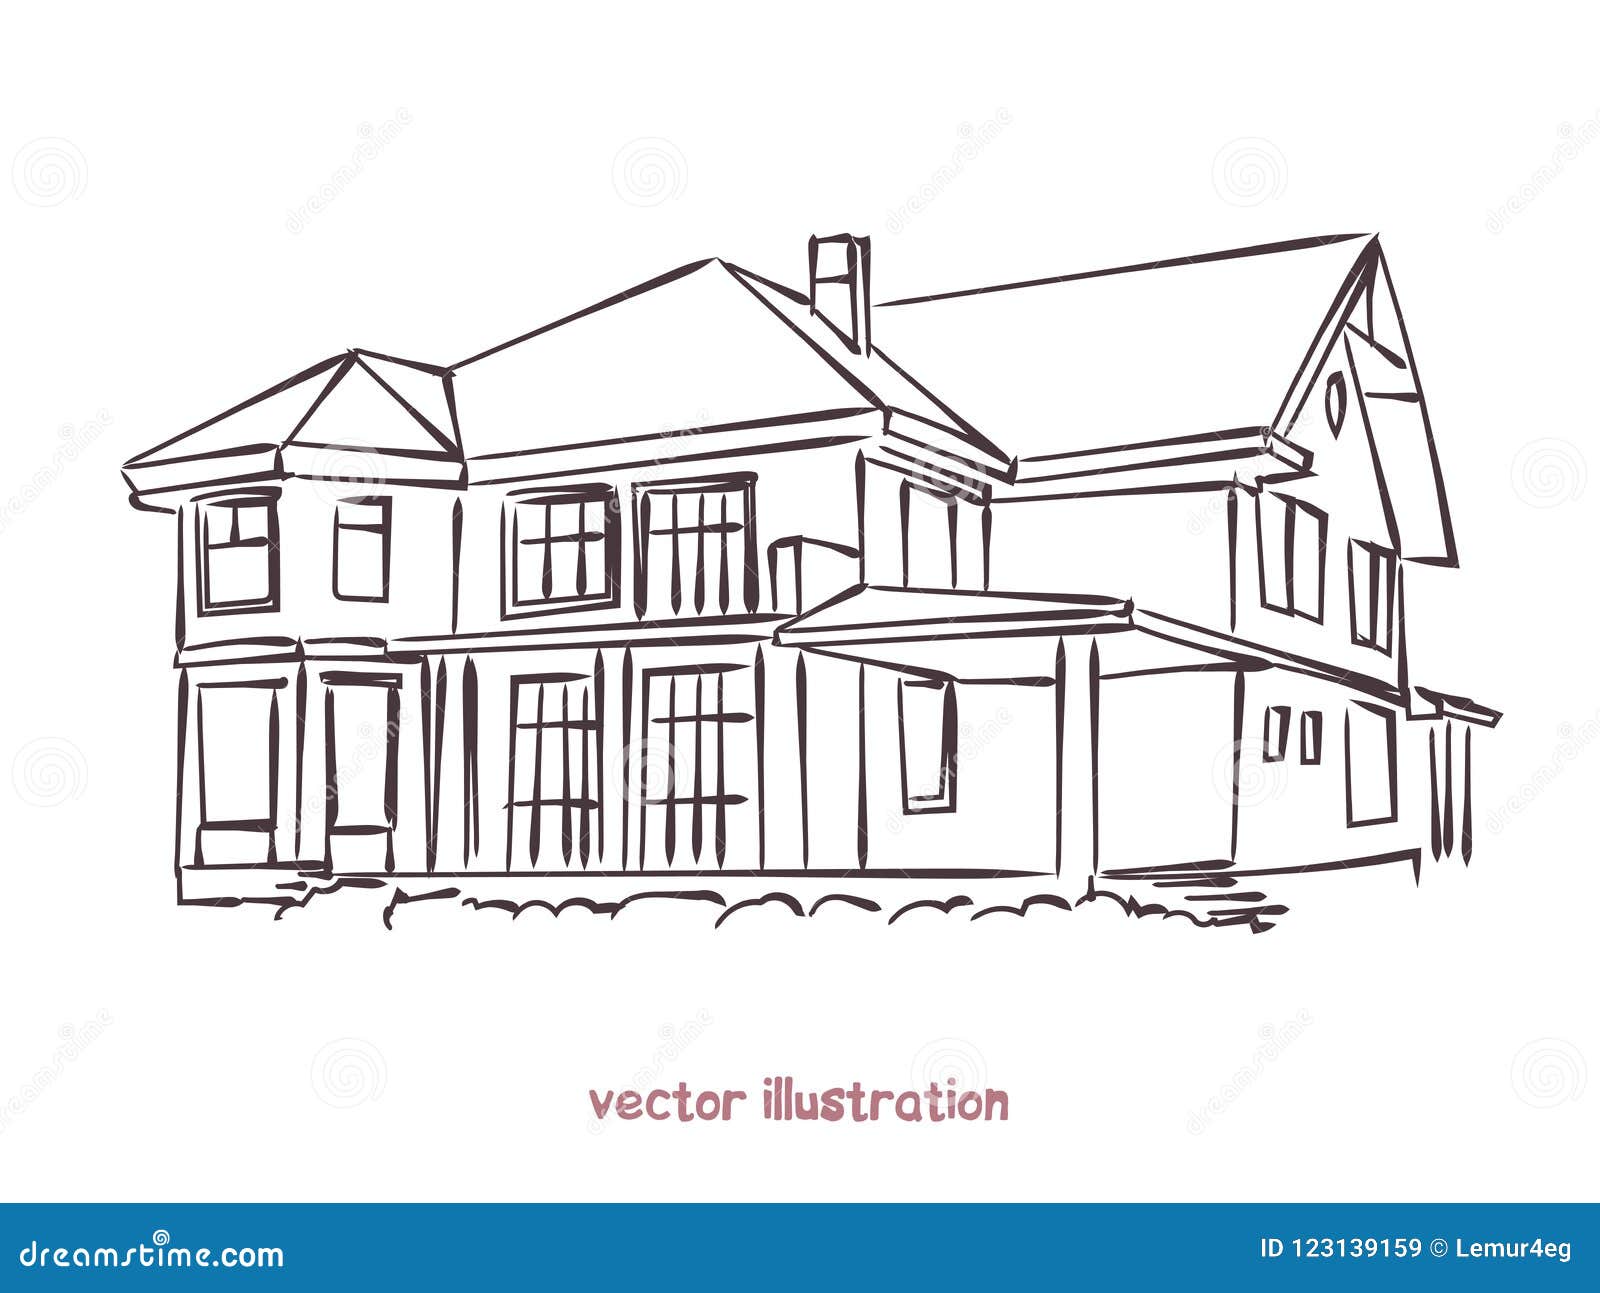 How to Draw a House Easy Step by Step - YouTube